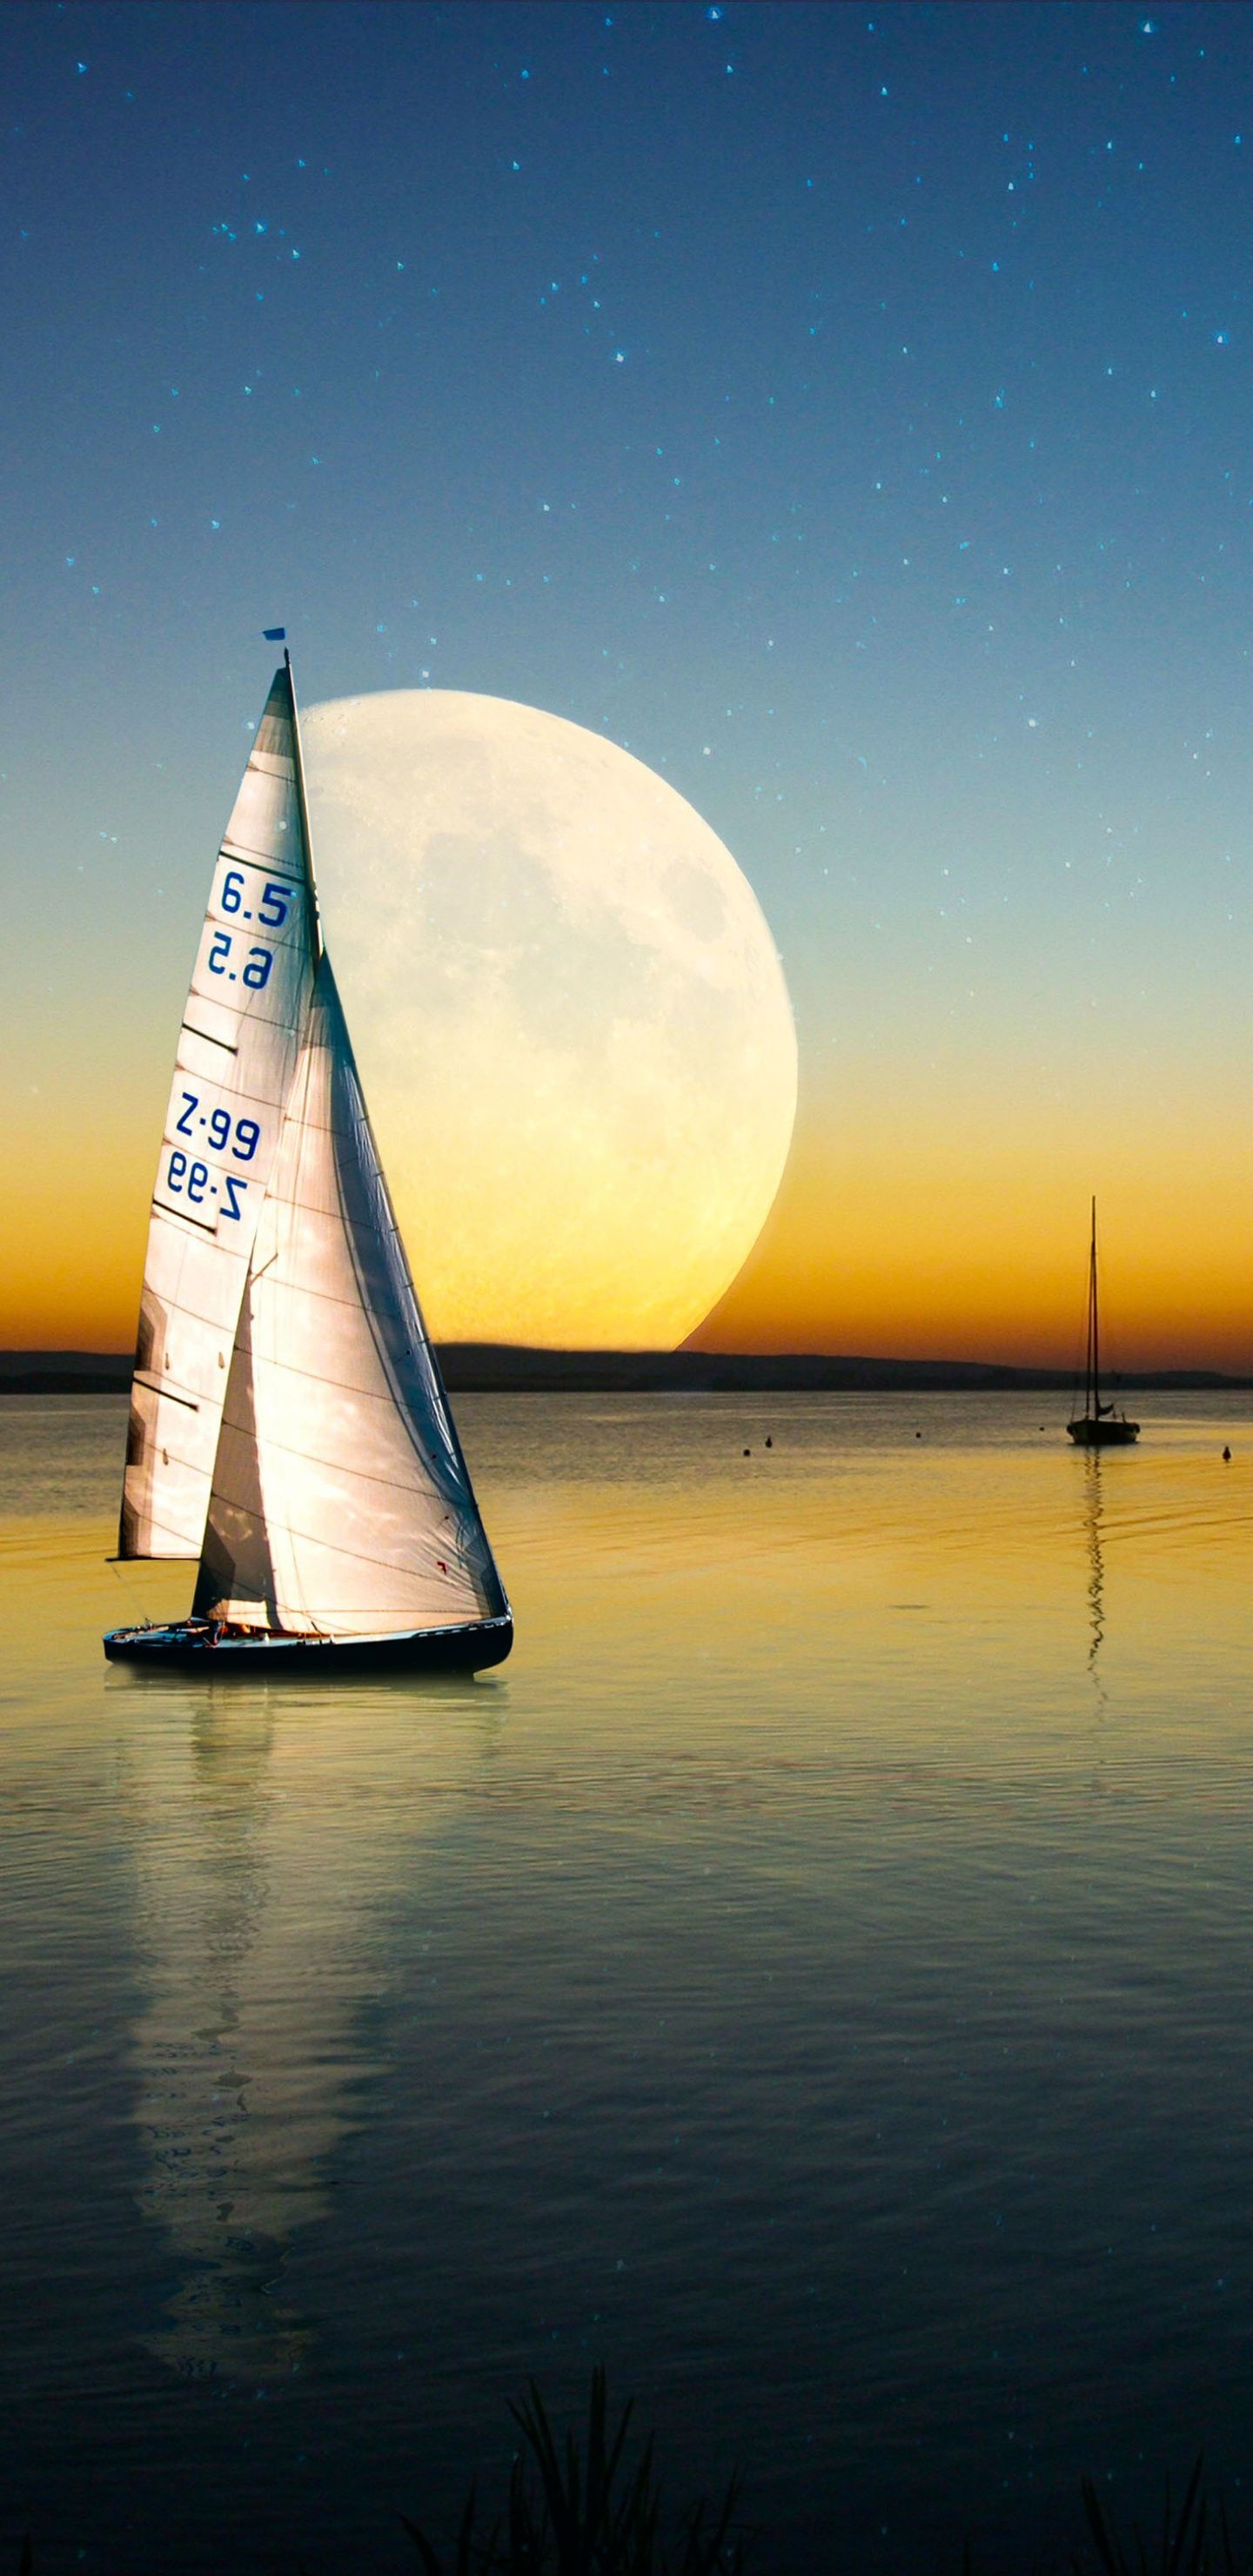 Sail boat travels, Moon sailing, Sunset wallpaper, Boating pictures, 1440x2960 HD Phone